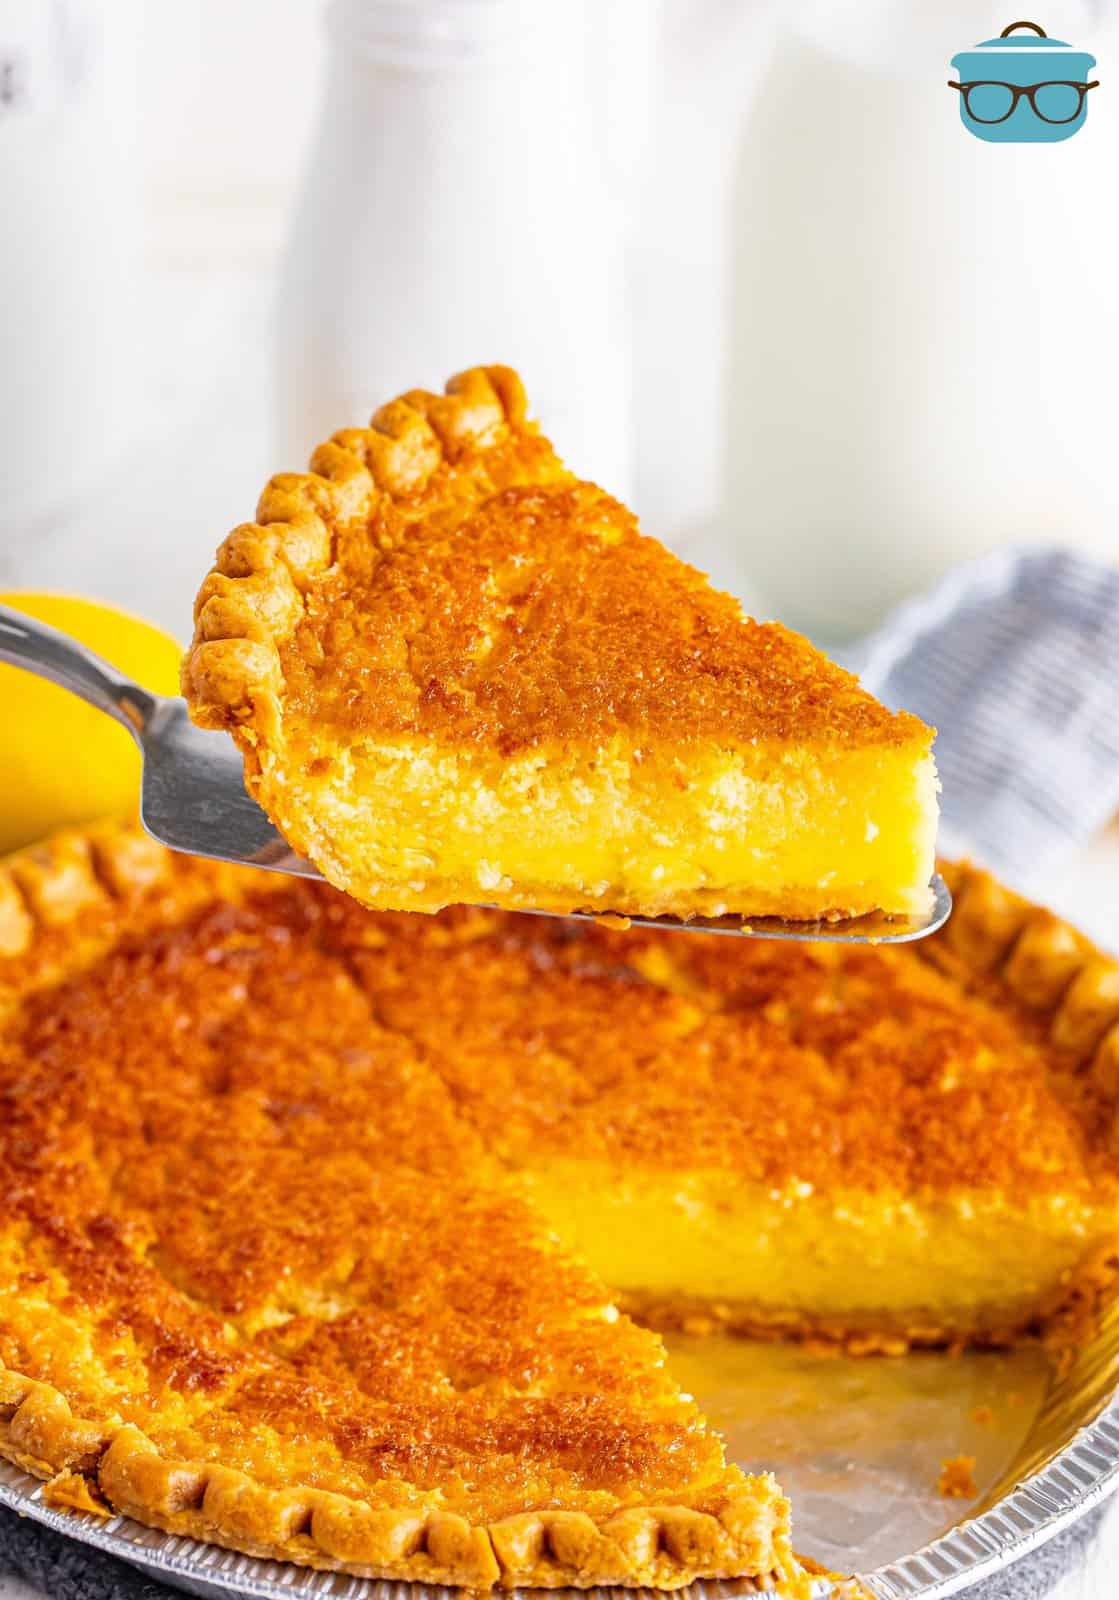 A slice of Buttermilk Pie being held above the rest of the pie.